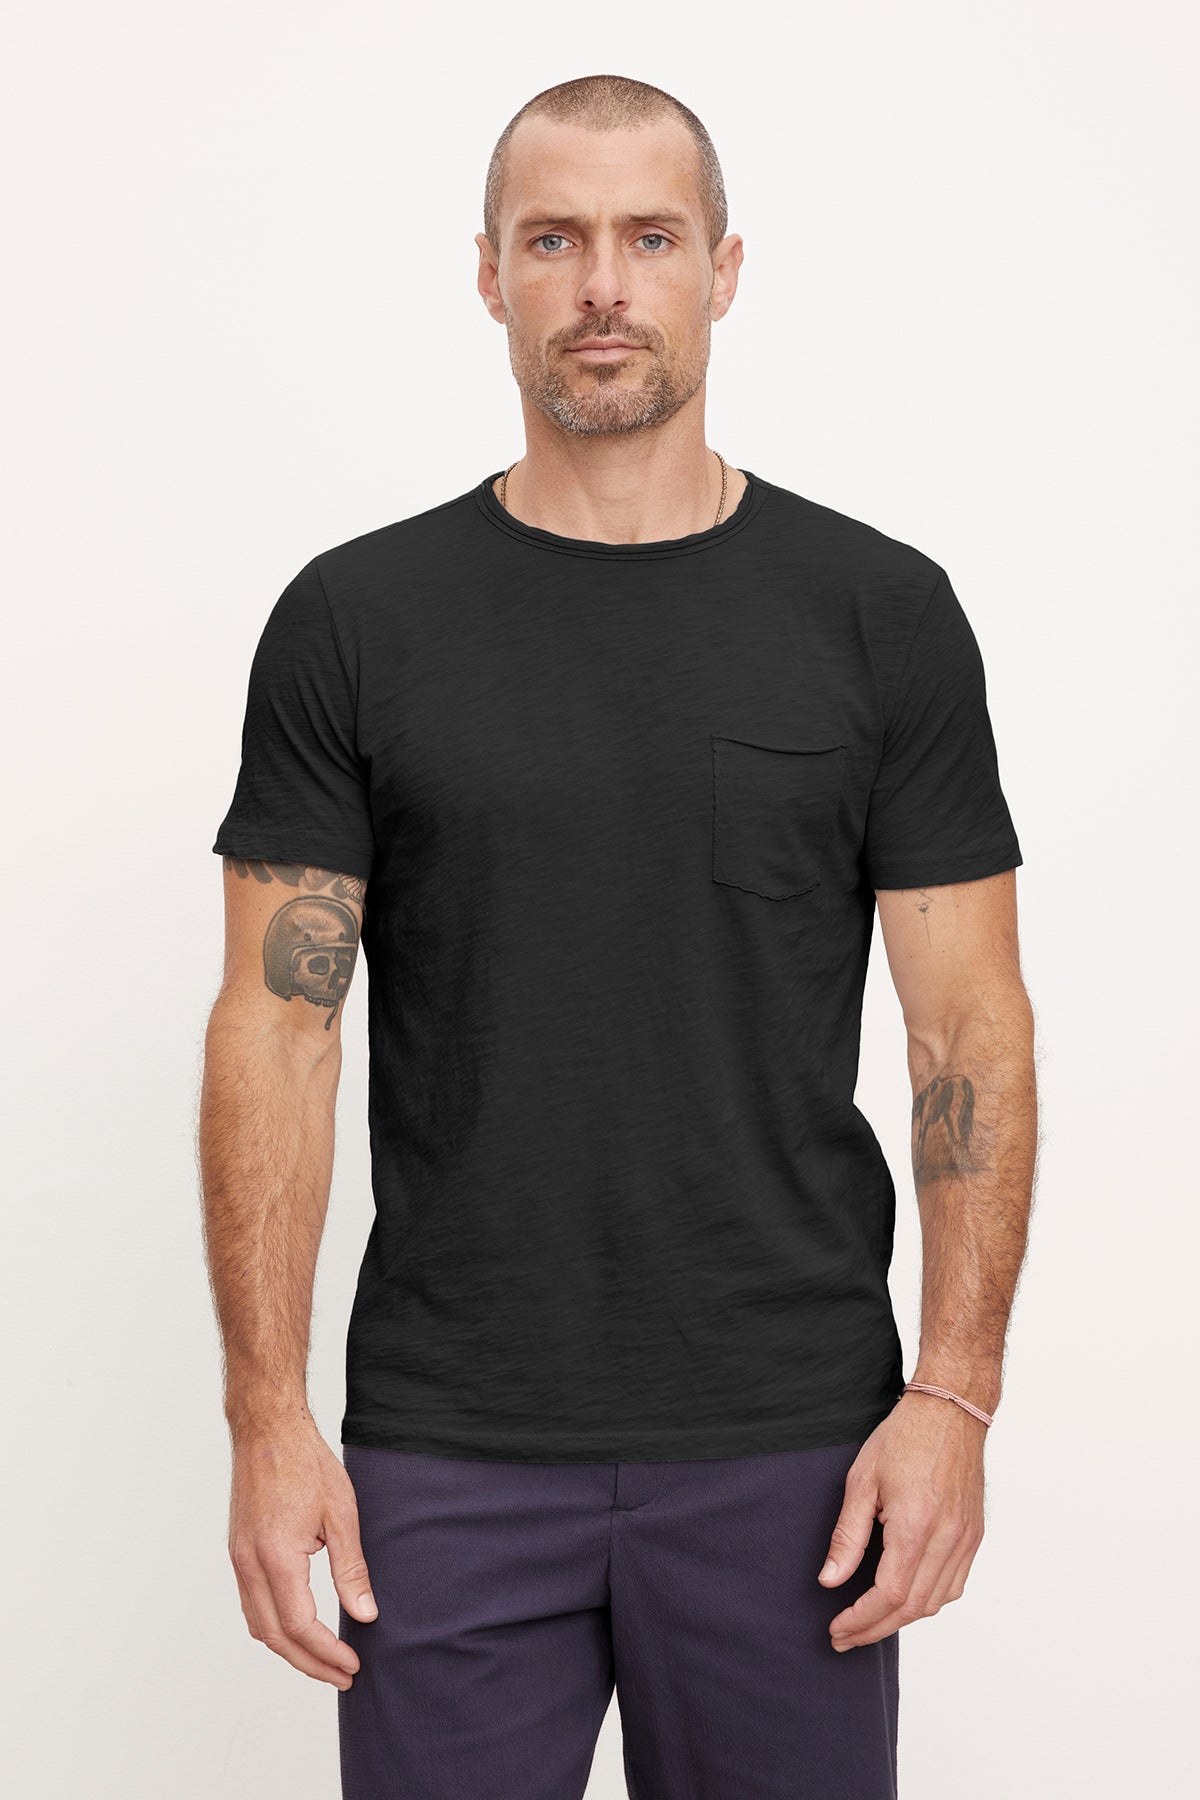 Man in black CHAD TEE with raw-edge details by Velvet by Graham & Spencer and dark trousers, standing straight and looking at the camera, with tattooed arms.-36909374800065